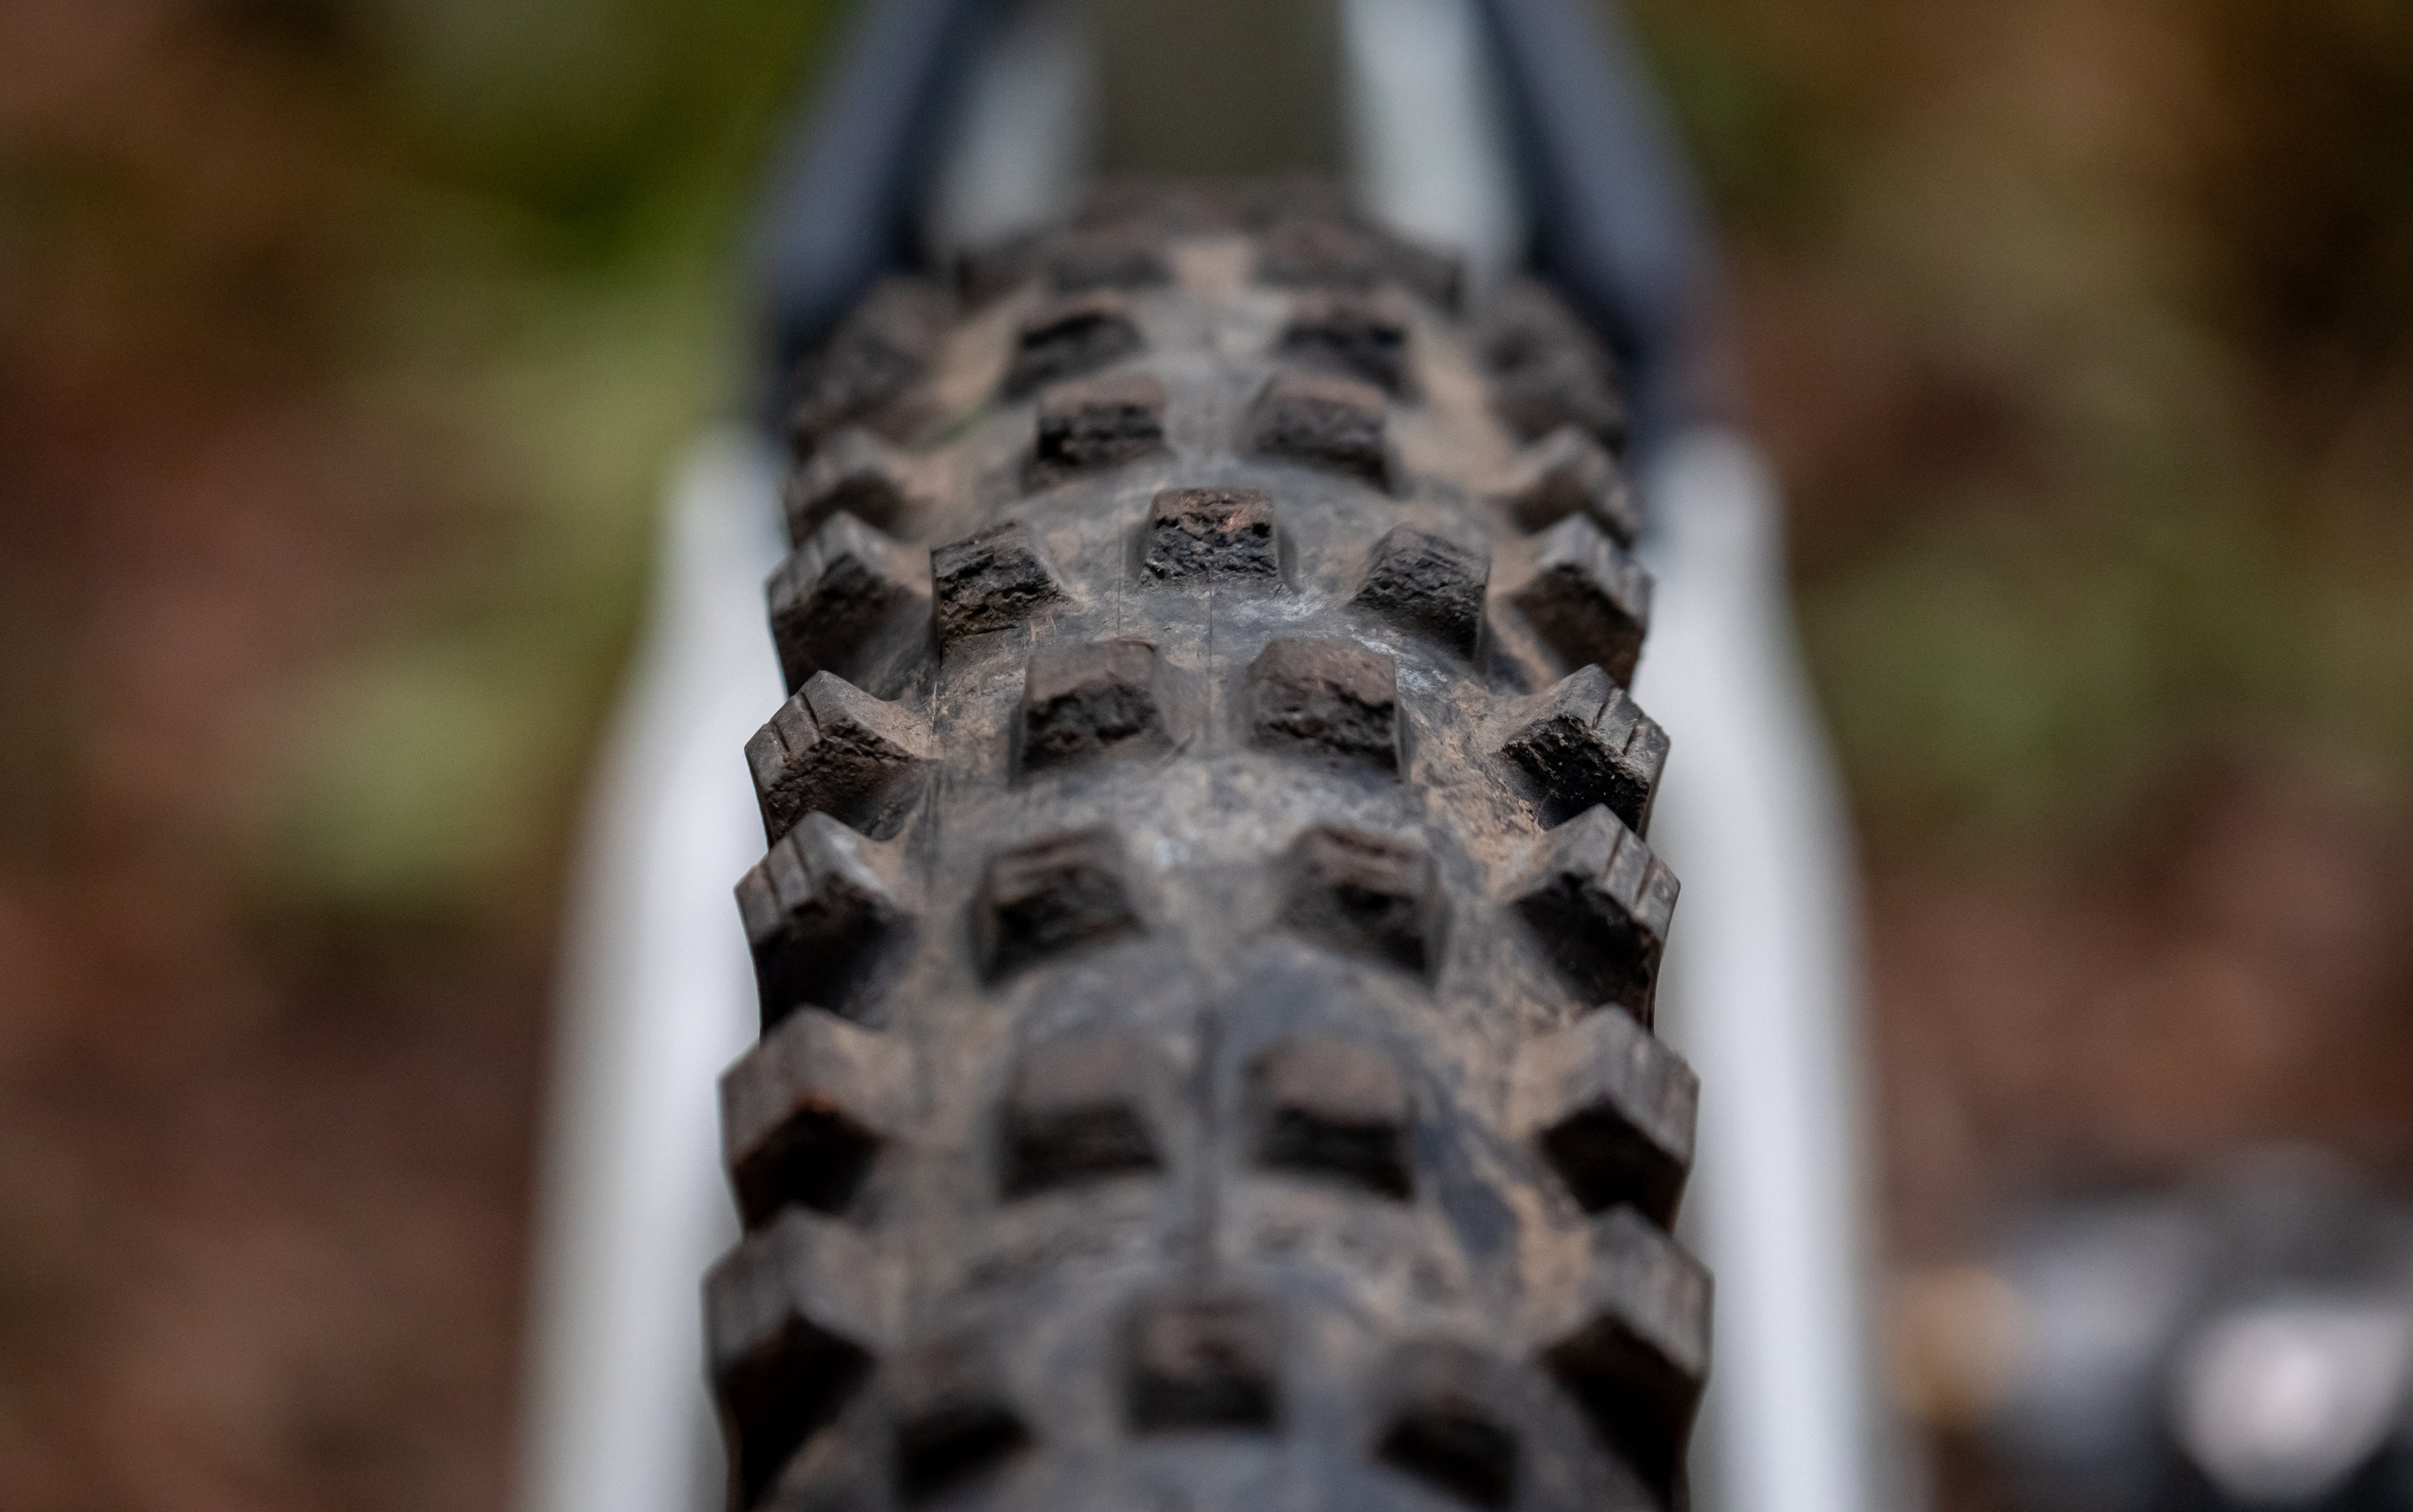 How durable are Schwalbe tires?